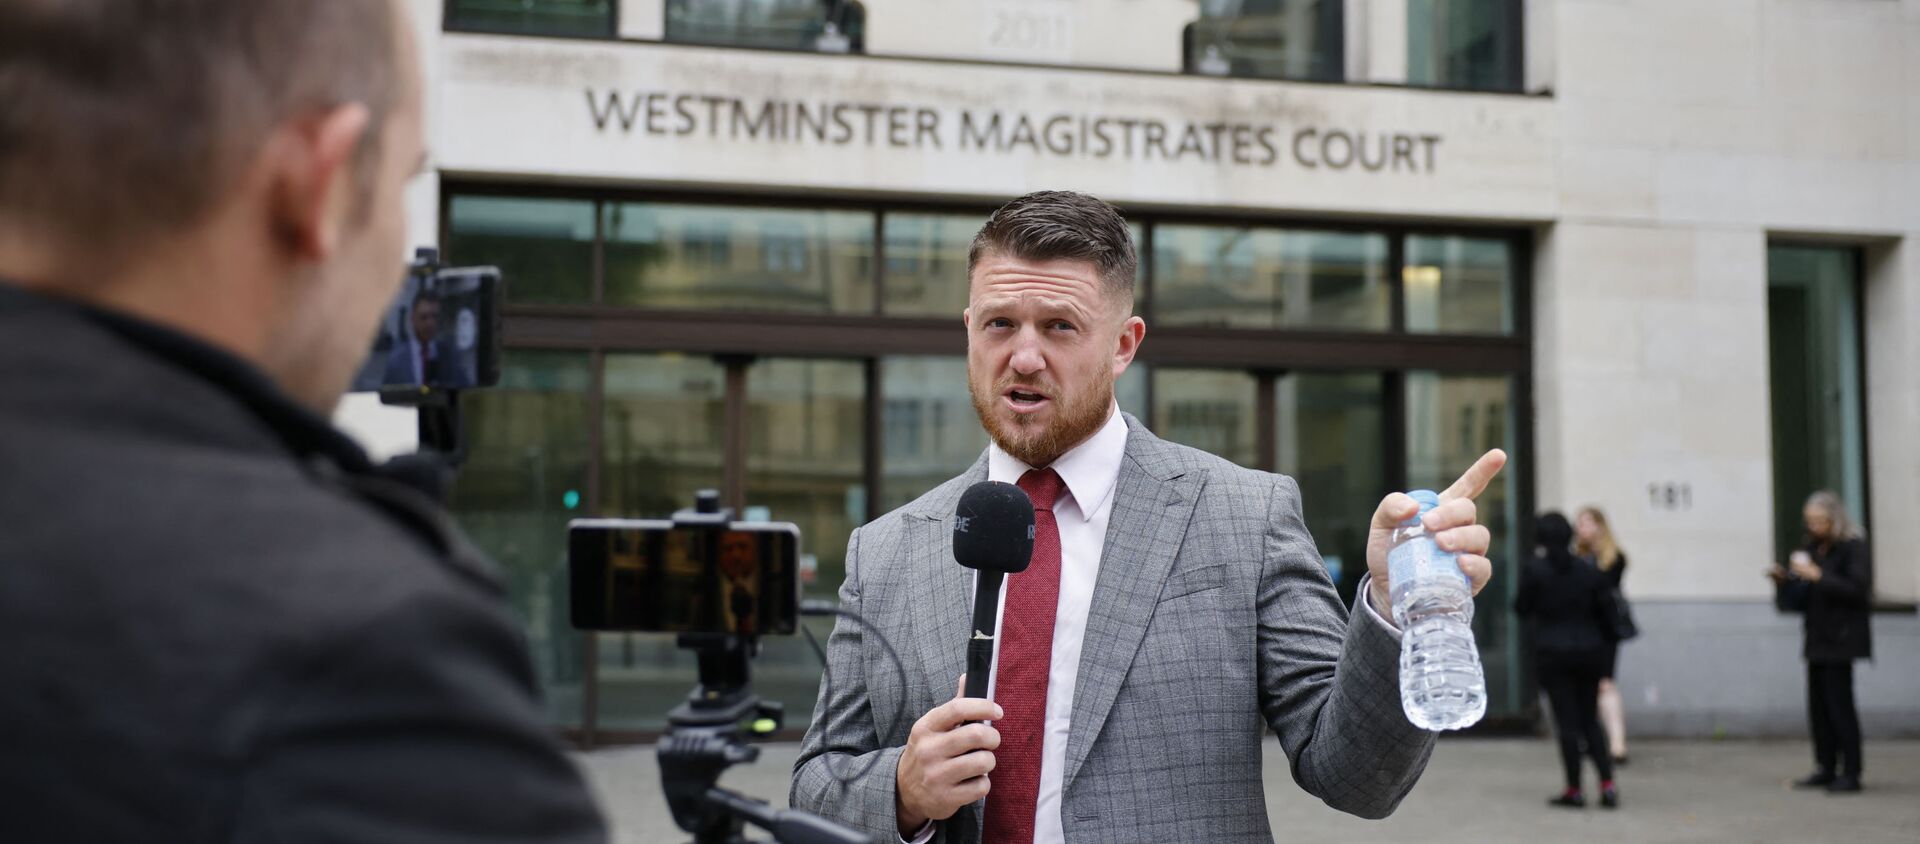 Founder and former leader of the anti-Islam English Defence League (EDL), Stephen Yaxley-Lennon, AKA Tommy Robinson, speaks to a camera as he arrives at Westminster Magistrates Court in central London on August 20, 2021 for a hearing after an application for a stalking protection order against him was filed.  - Sputnik International, 1920, 21.08.2021